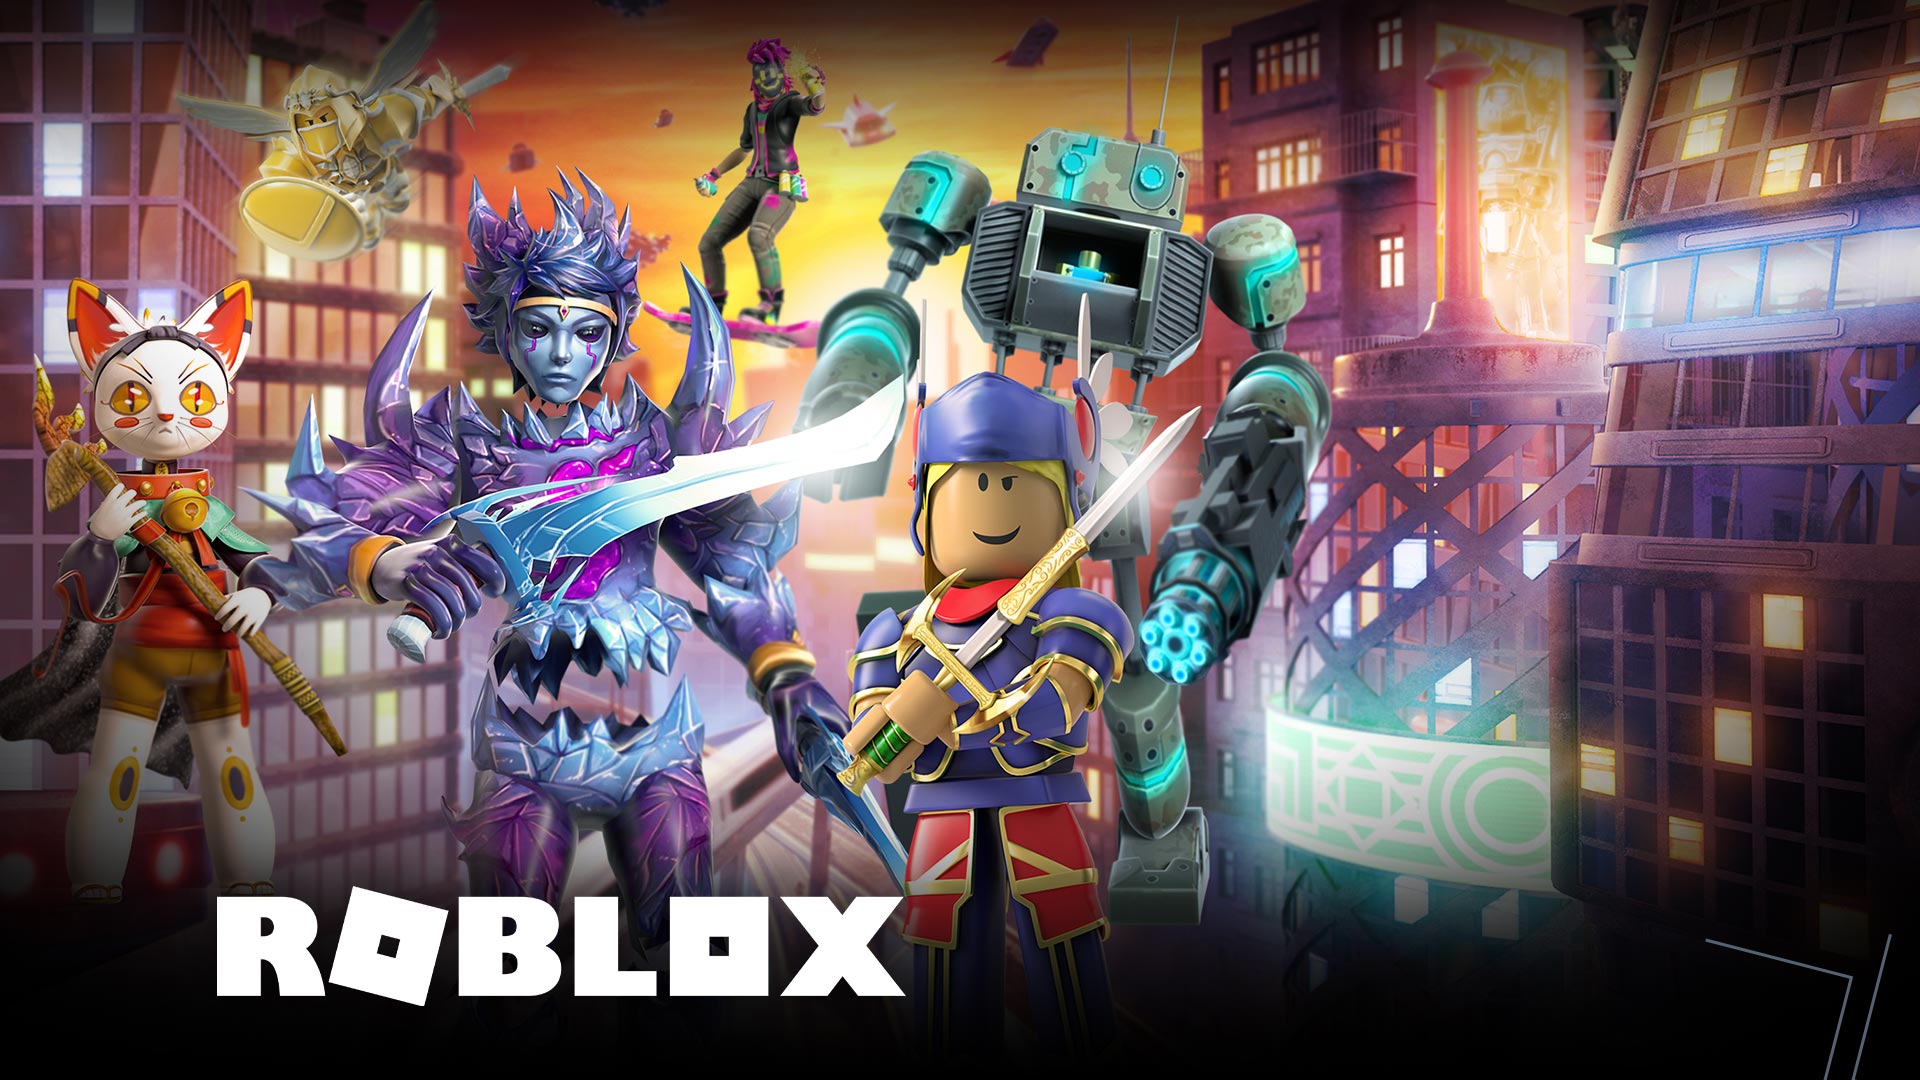 Roblox, several characters from Roblox posing